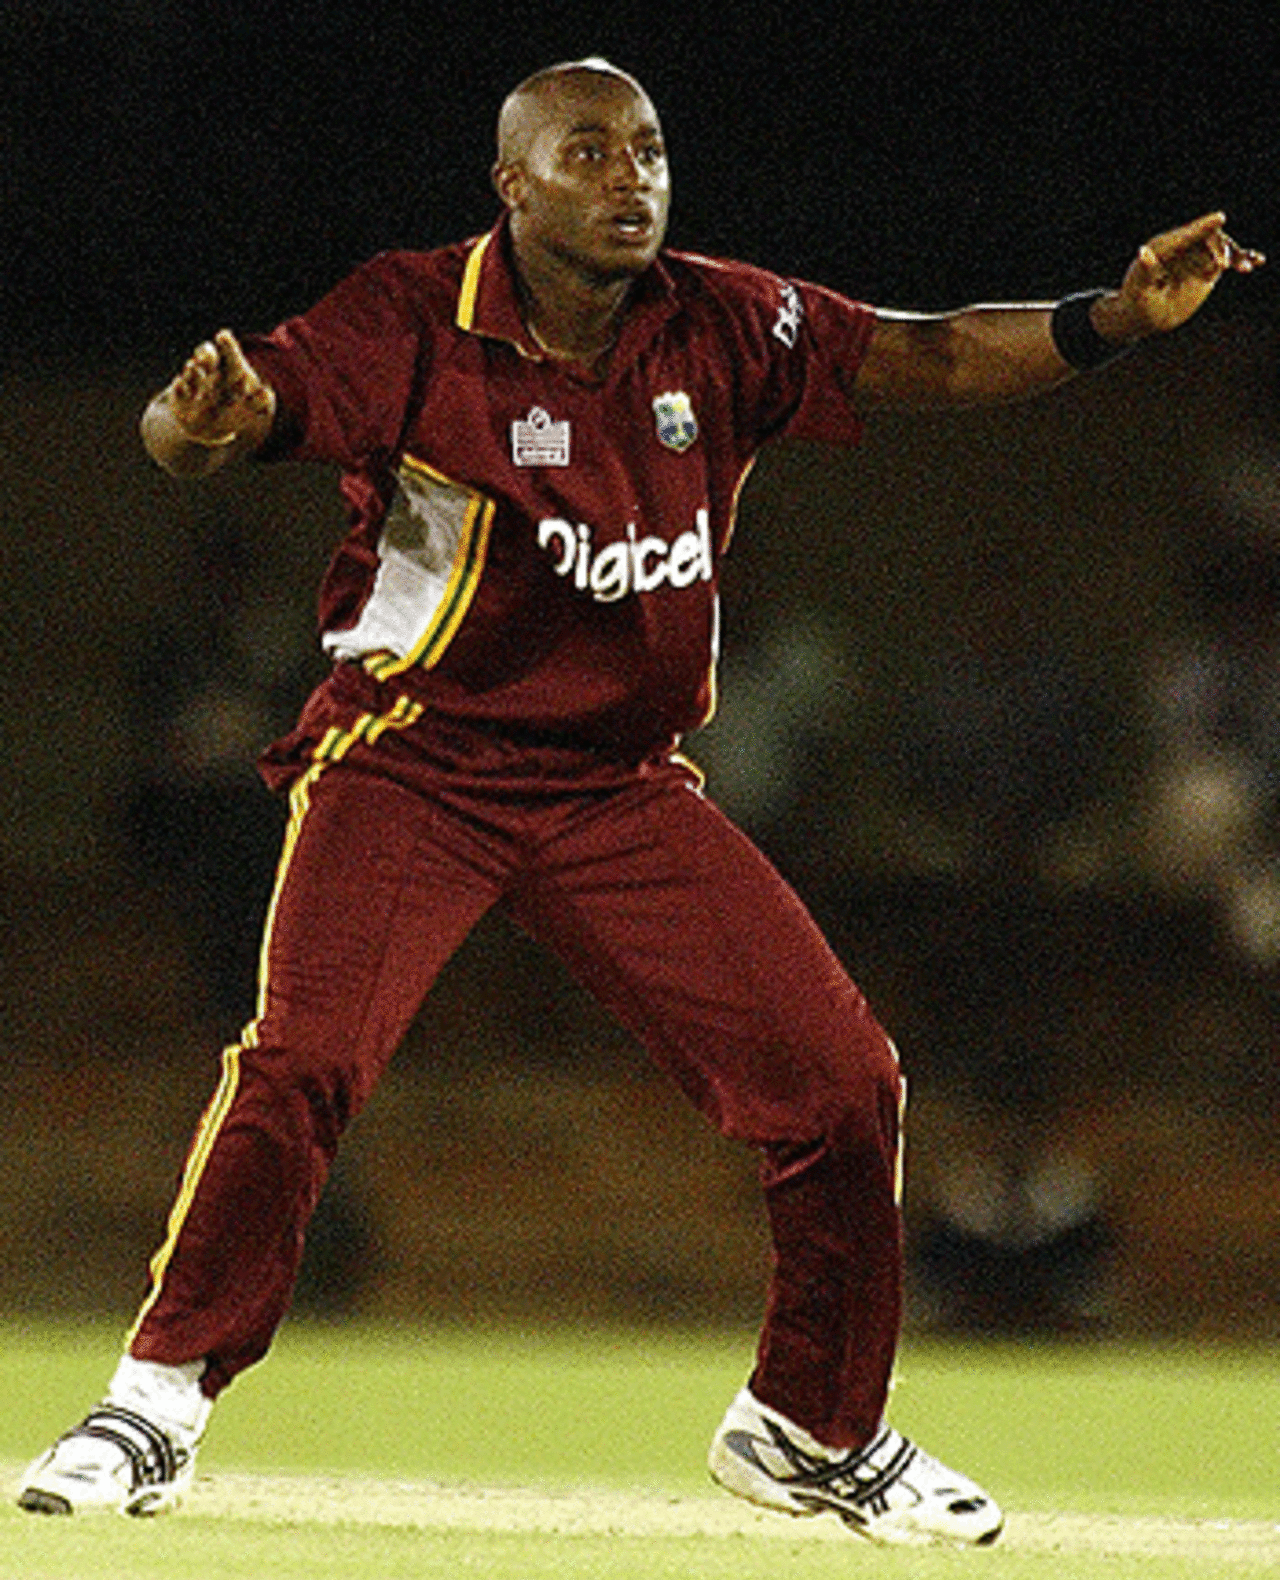 Tino Best appeals against India in the Indian Oil Cup at the Dambulla Cricket Stadium, July 31, 2005